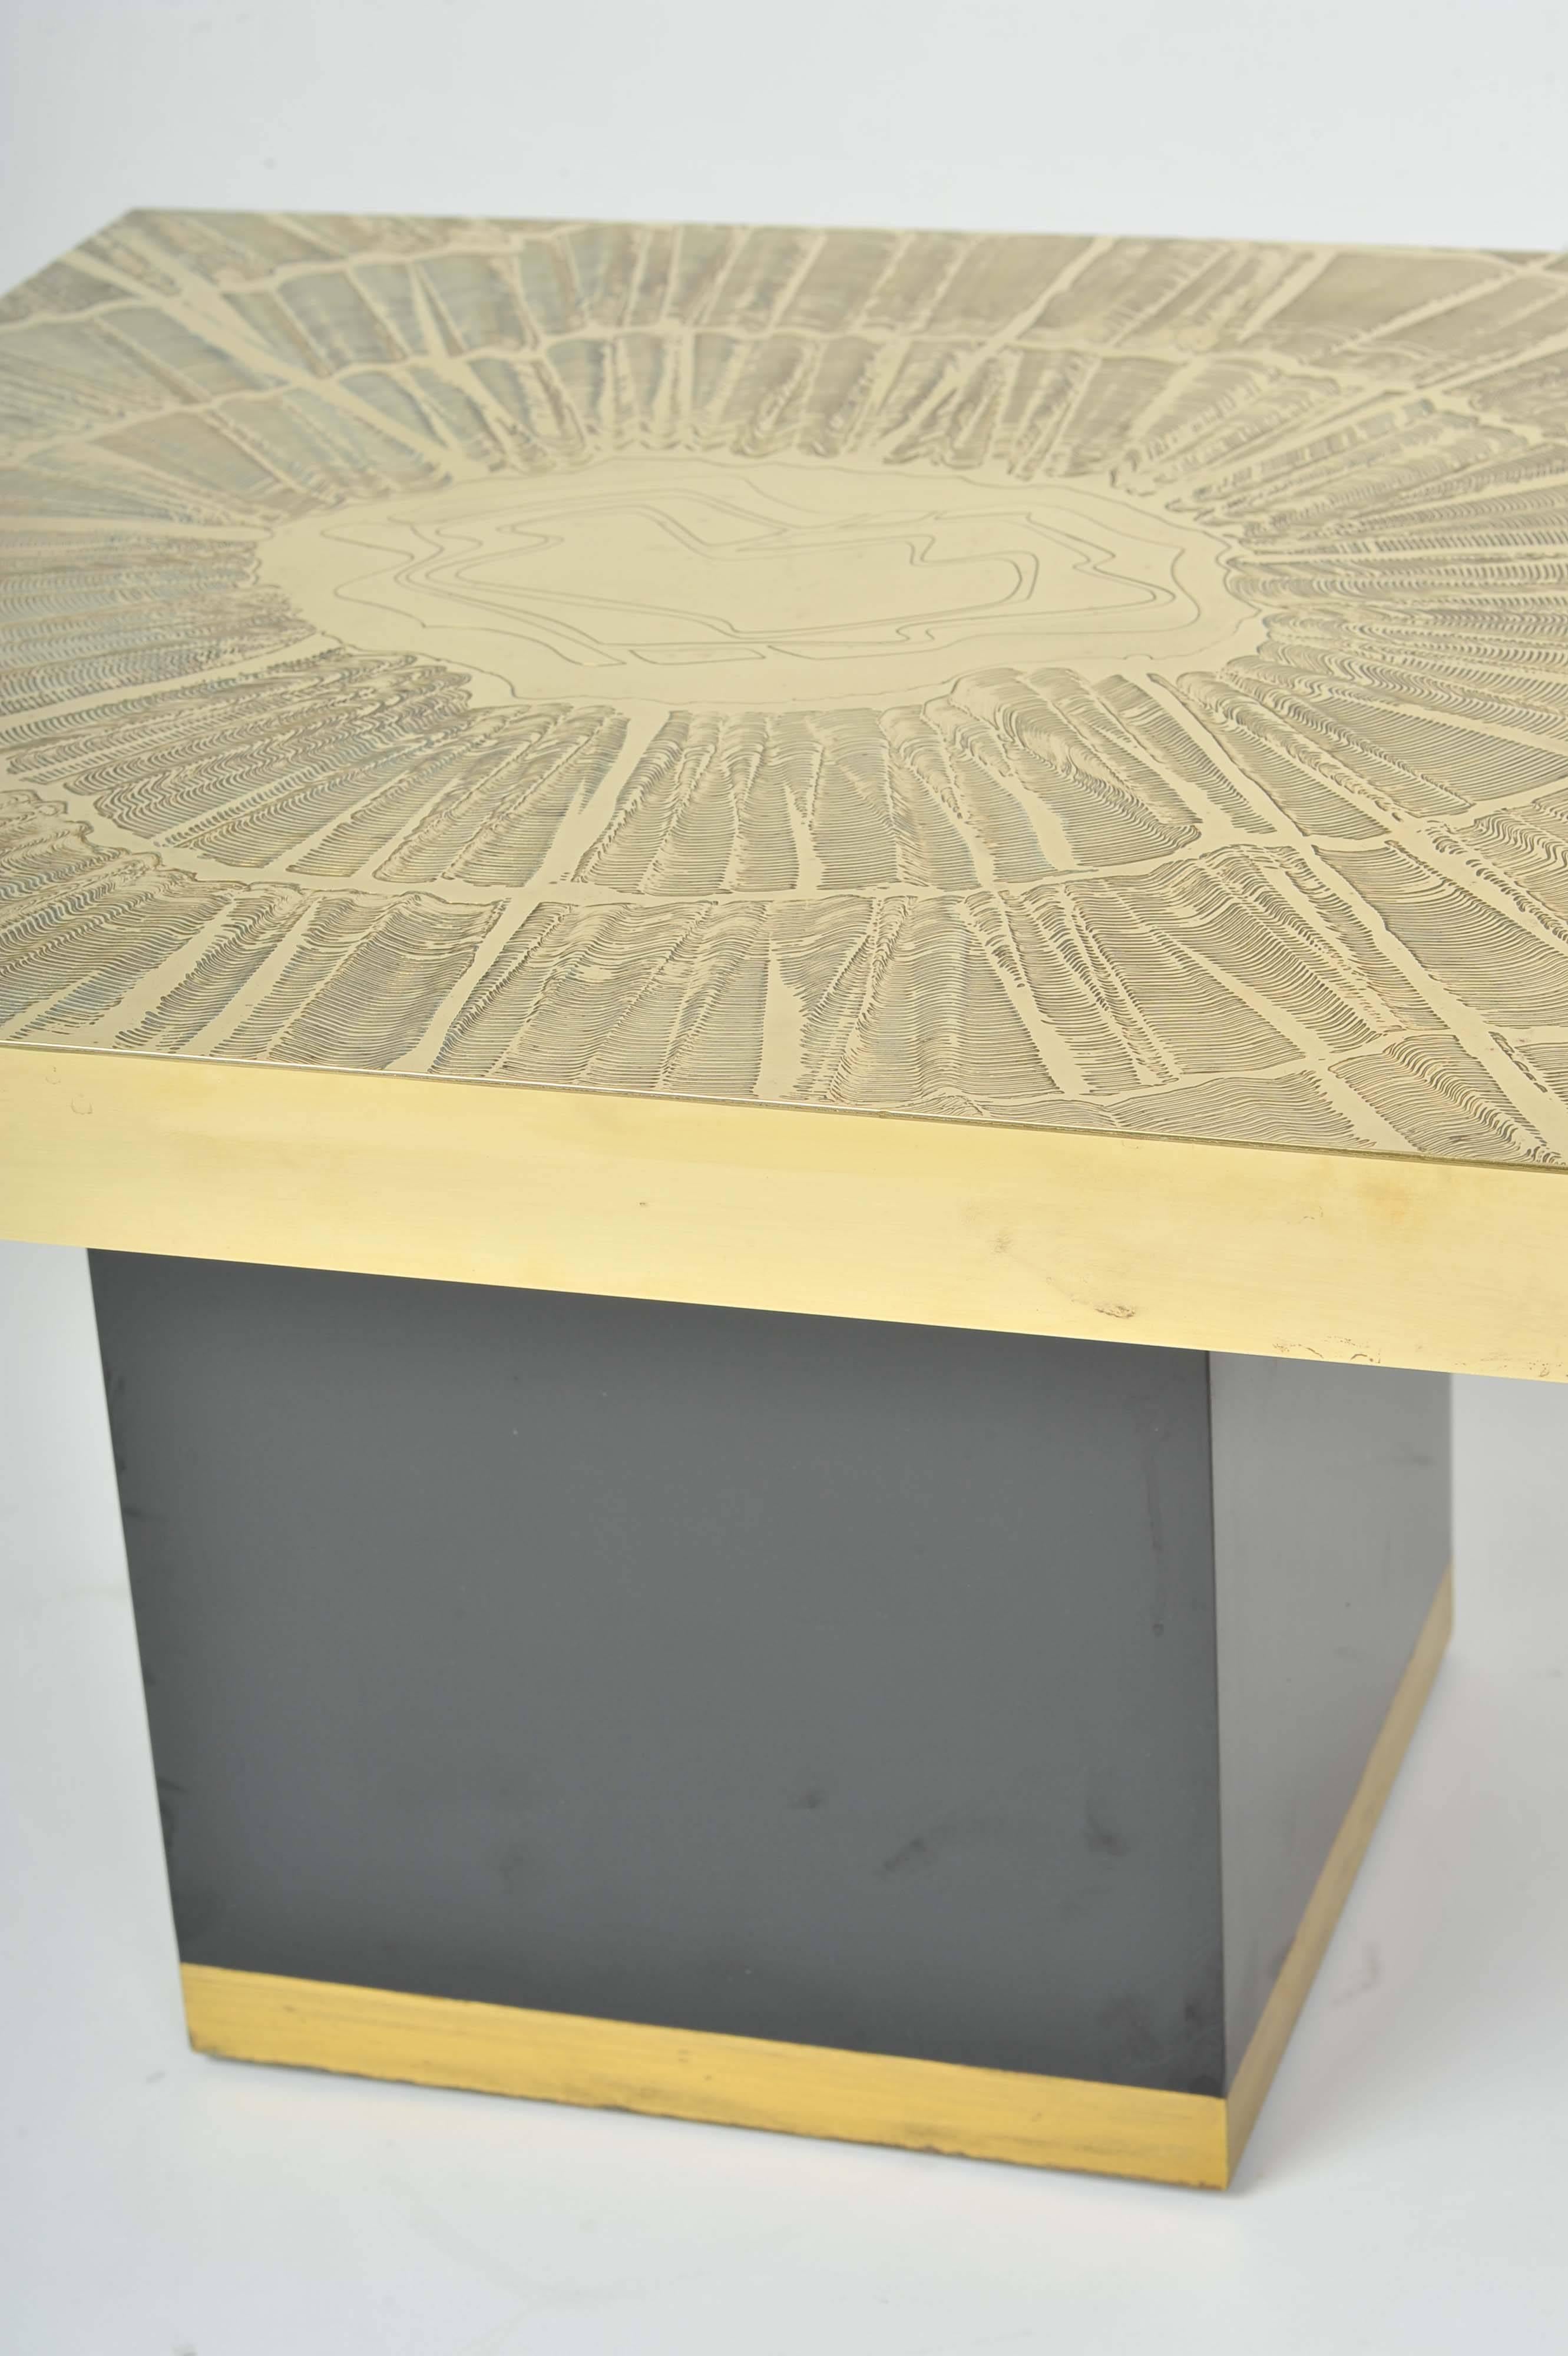 Hand-Crafted 1970's Etched Brass Brutalist Square Coffee Table with Abstract Sun Ray Design